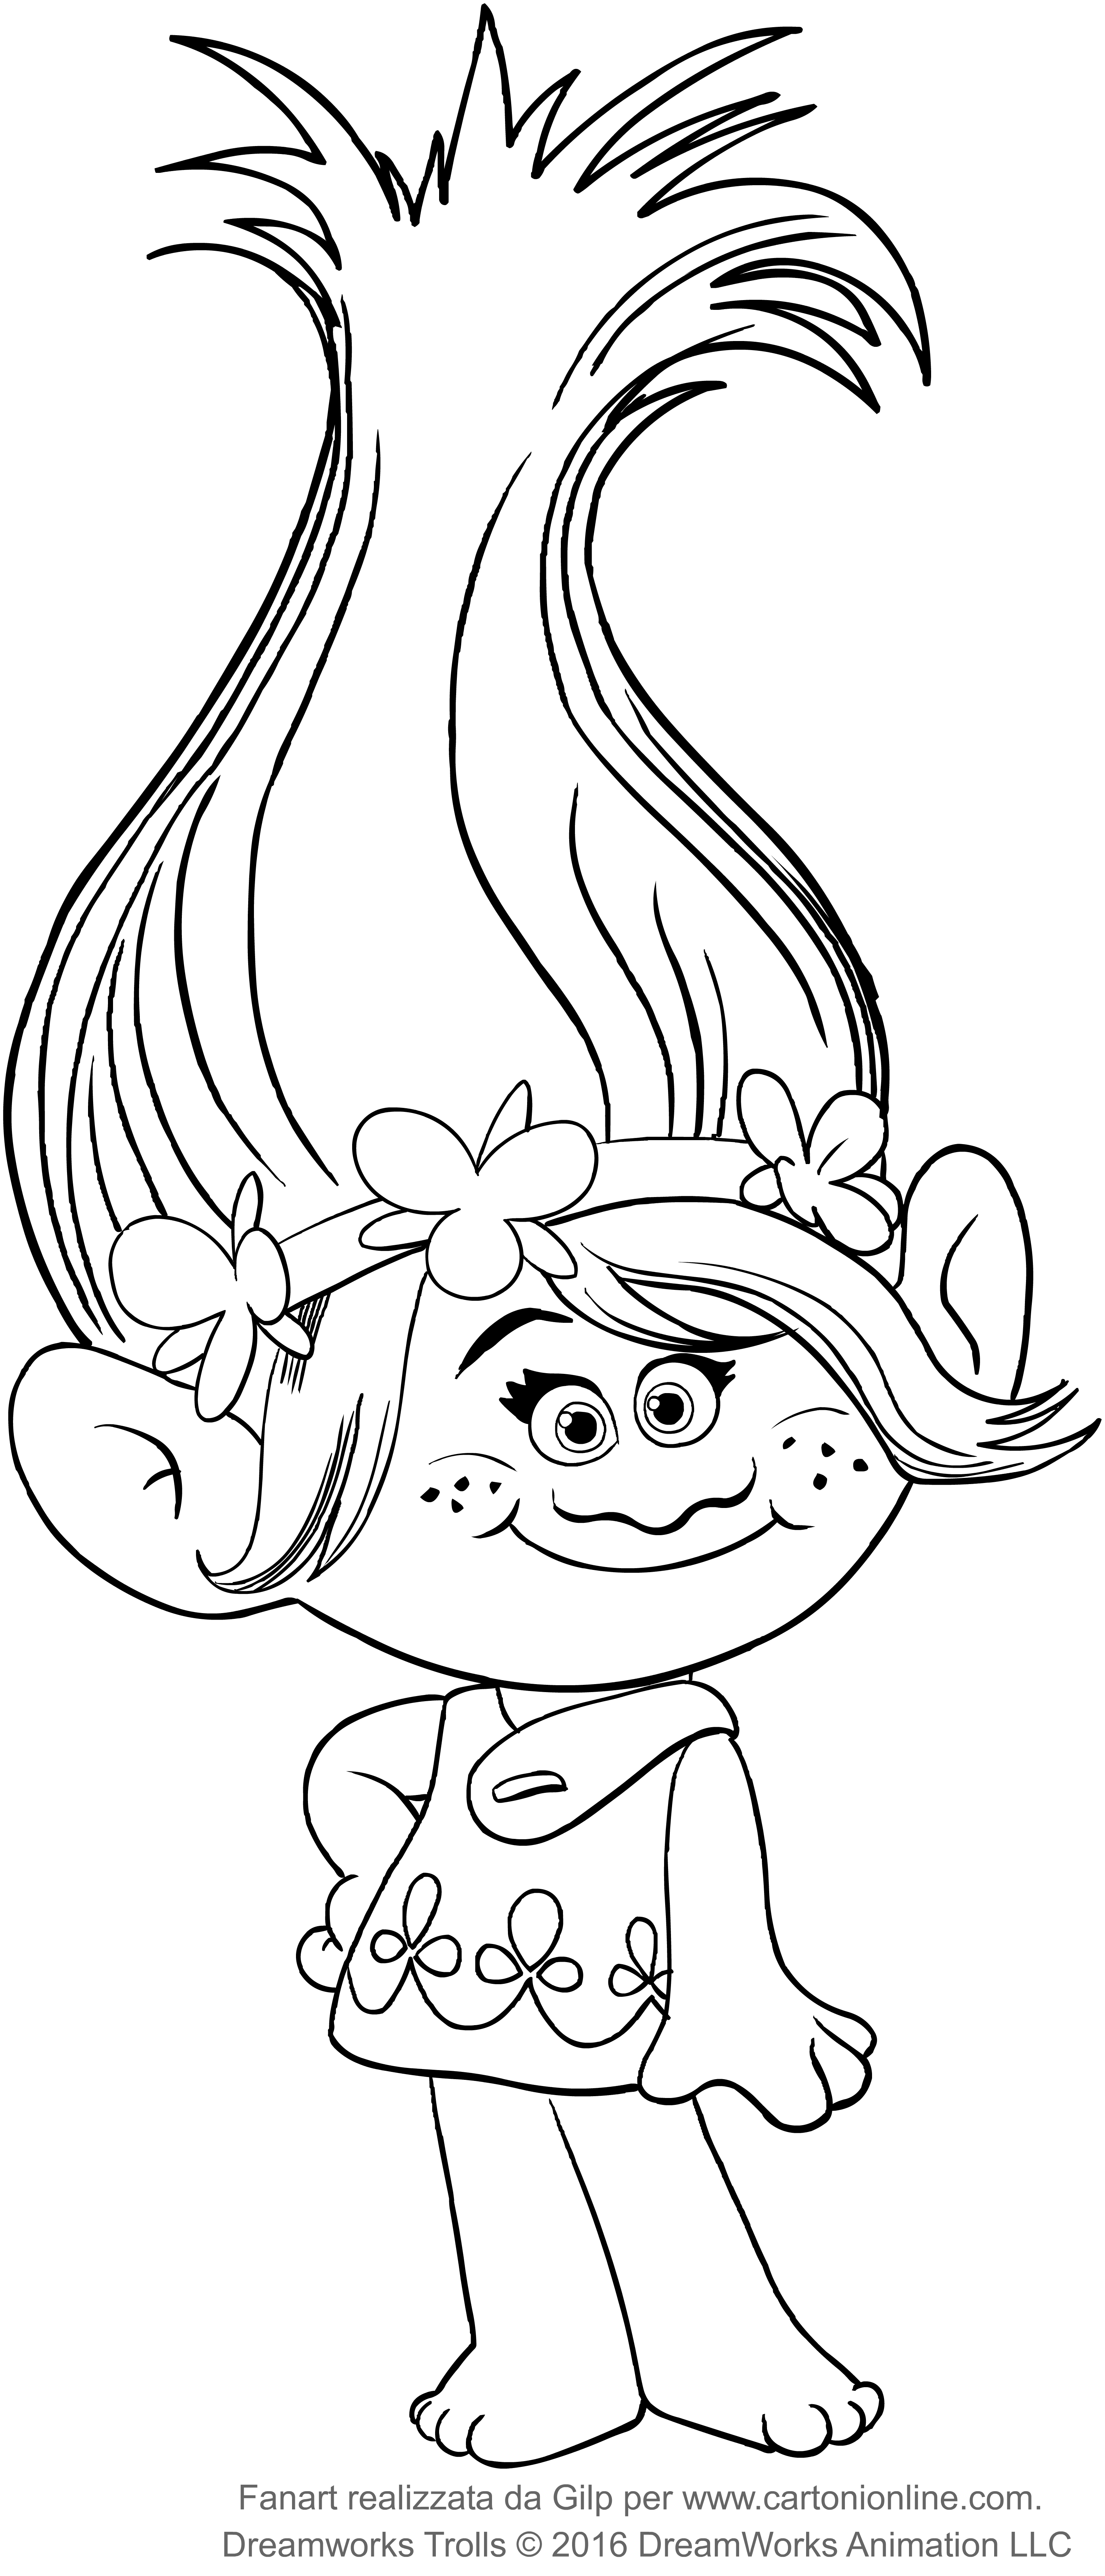  Poppy from the Trolls coloring page to print